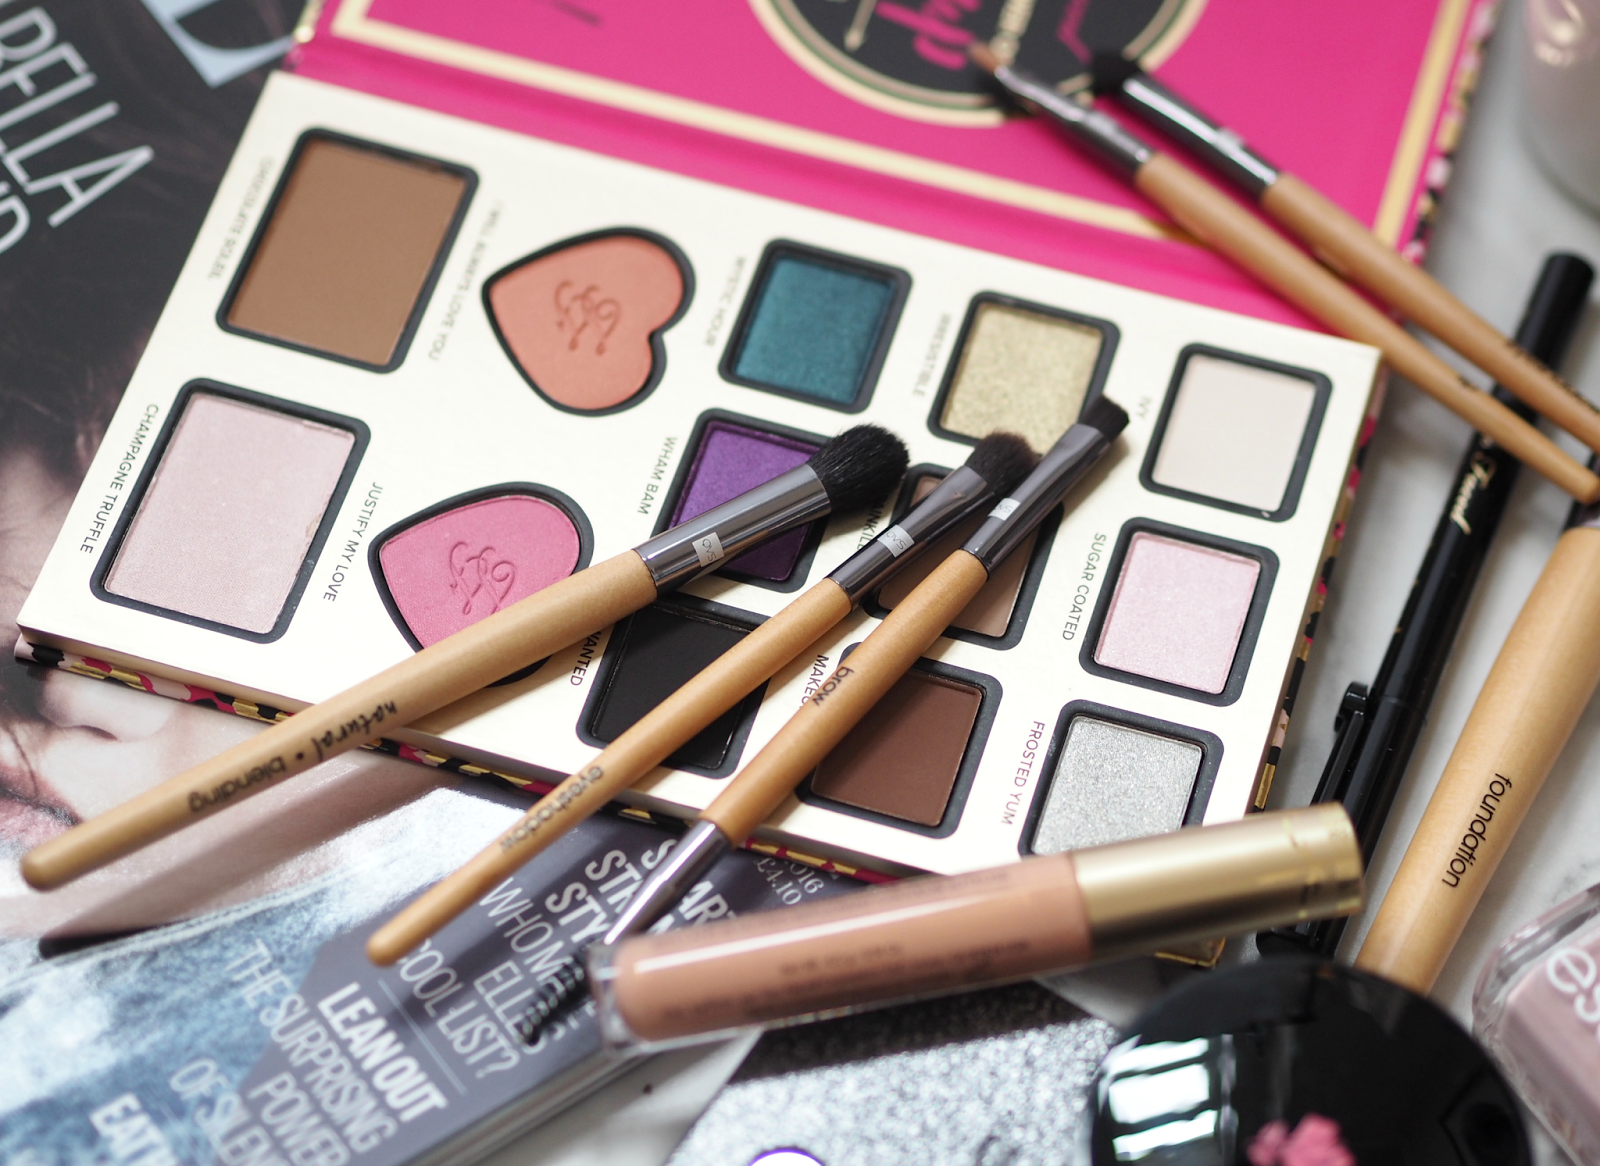 How To Create A Foolproof Smokey Eye (No Matter Your Age, Skill Or Look) With QVS Brushes